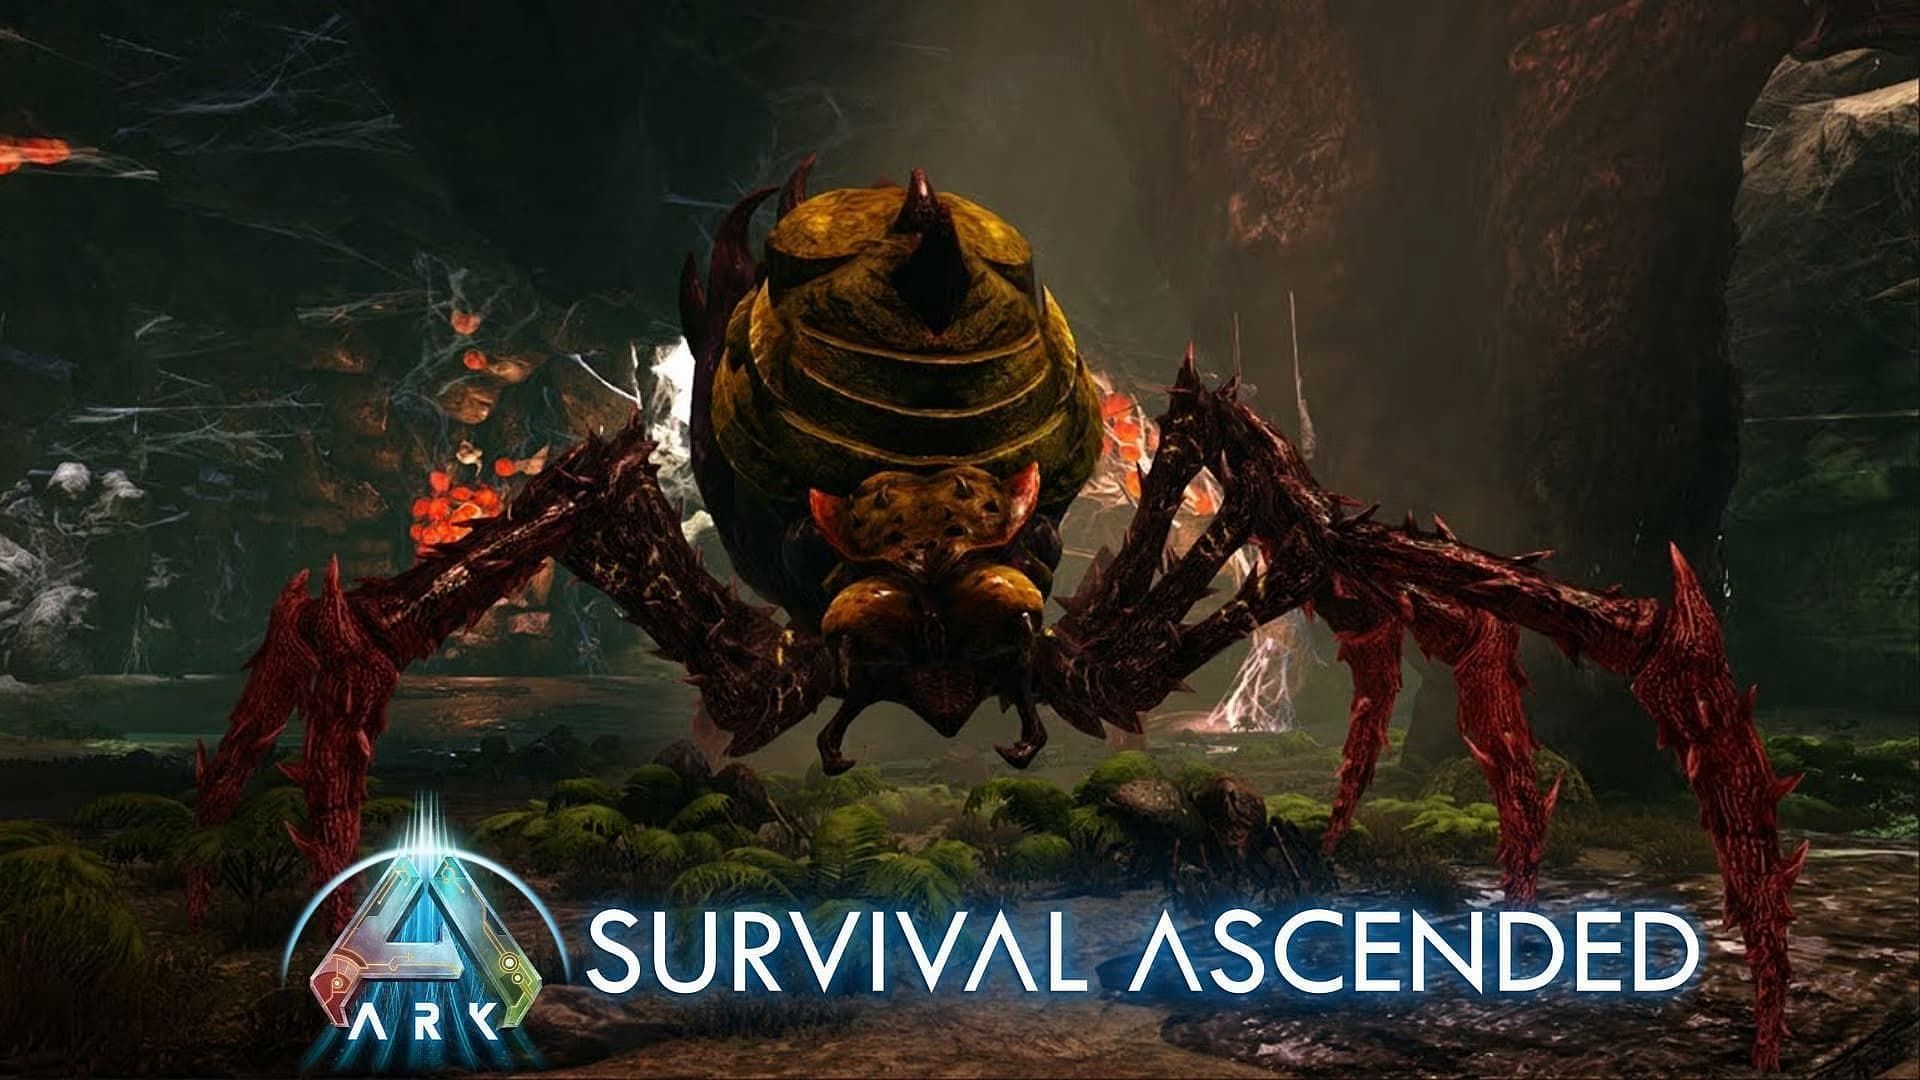 The Broodmother ARK Survival Ascended boss